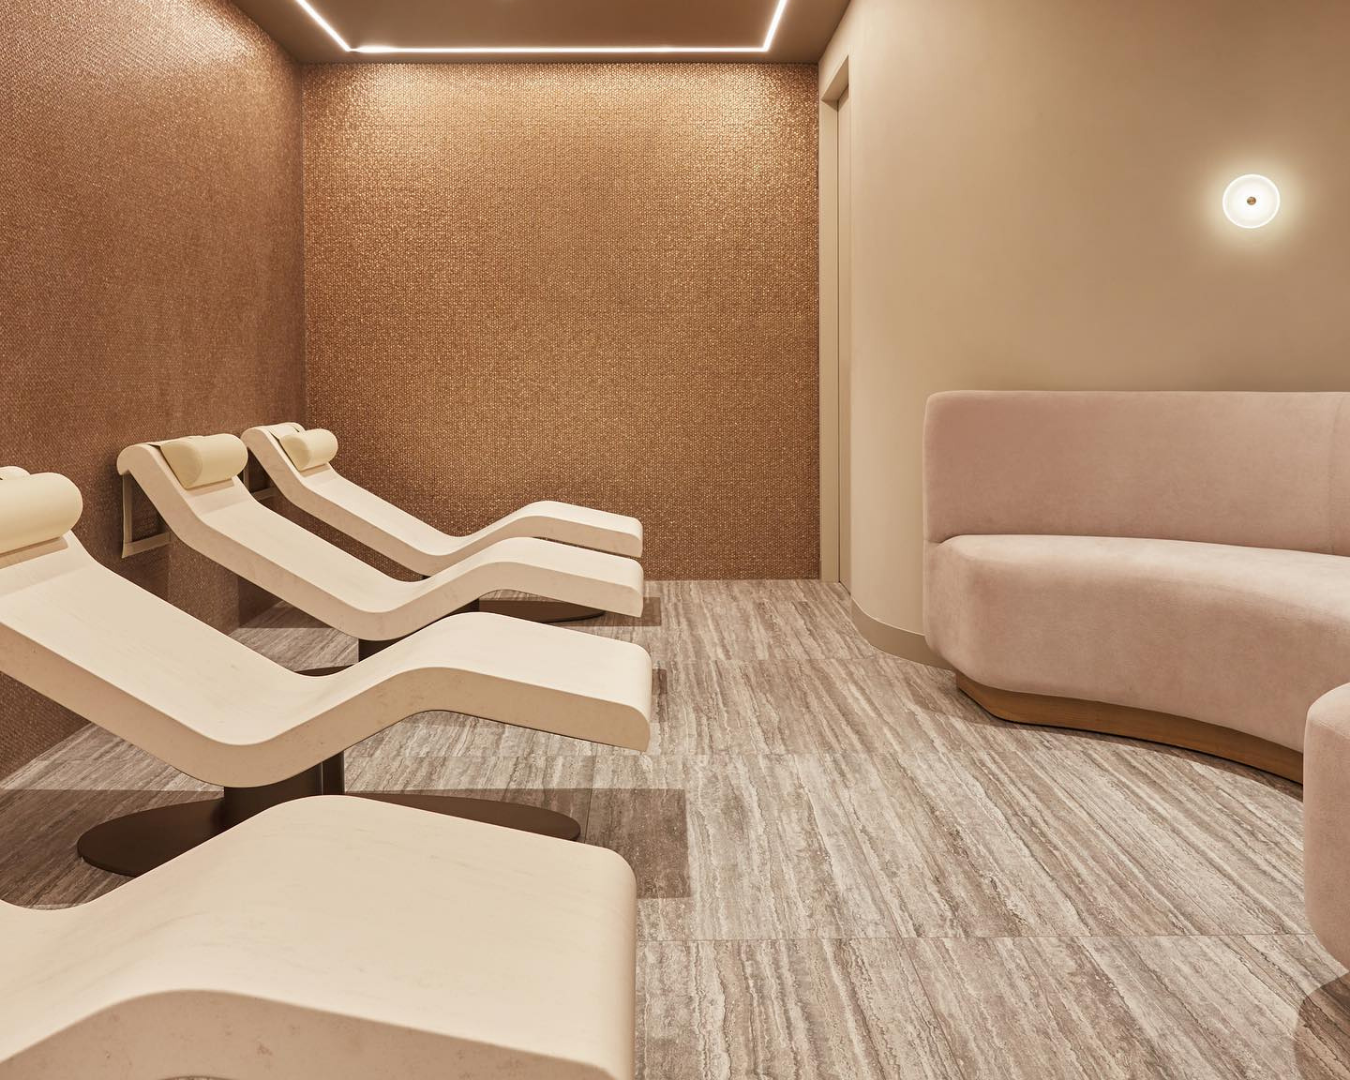 East Day Spa's marble loungers in the new Tepidarium